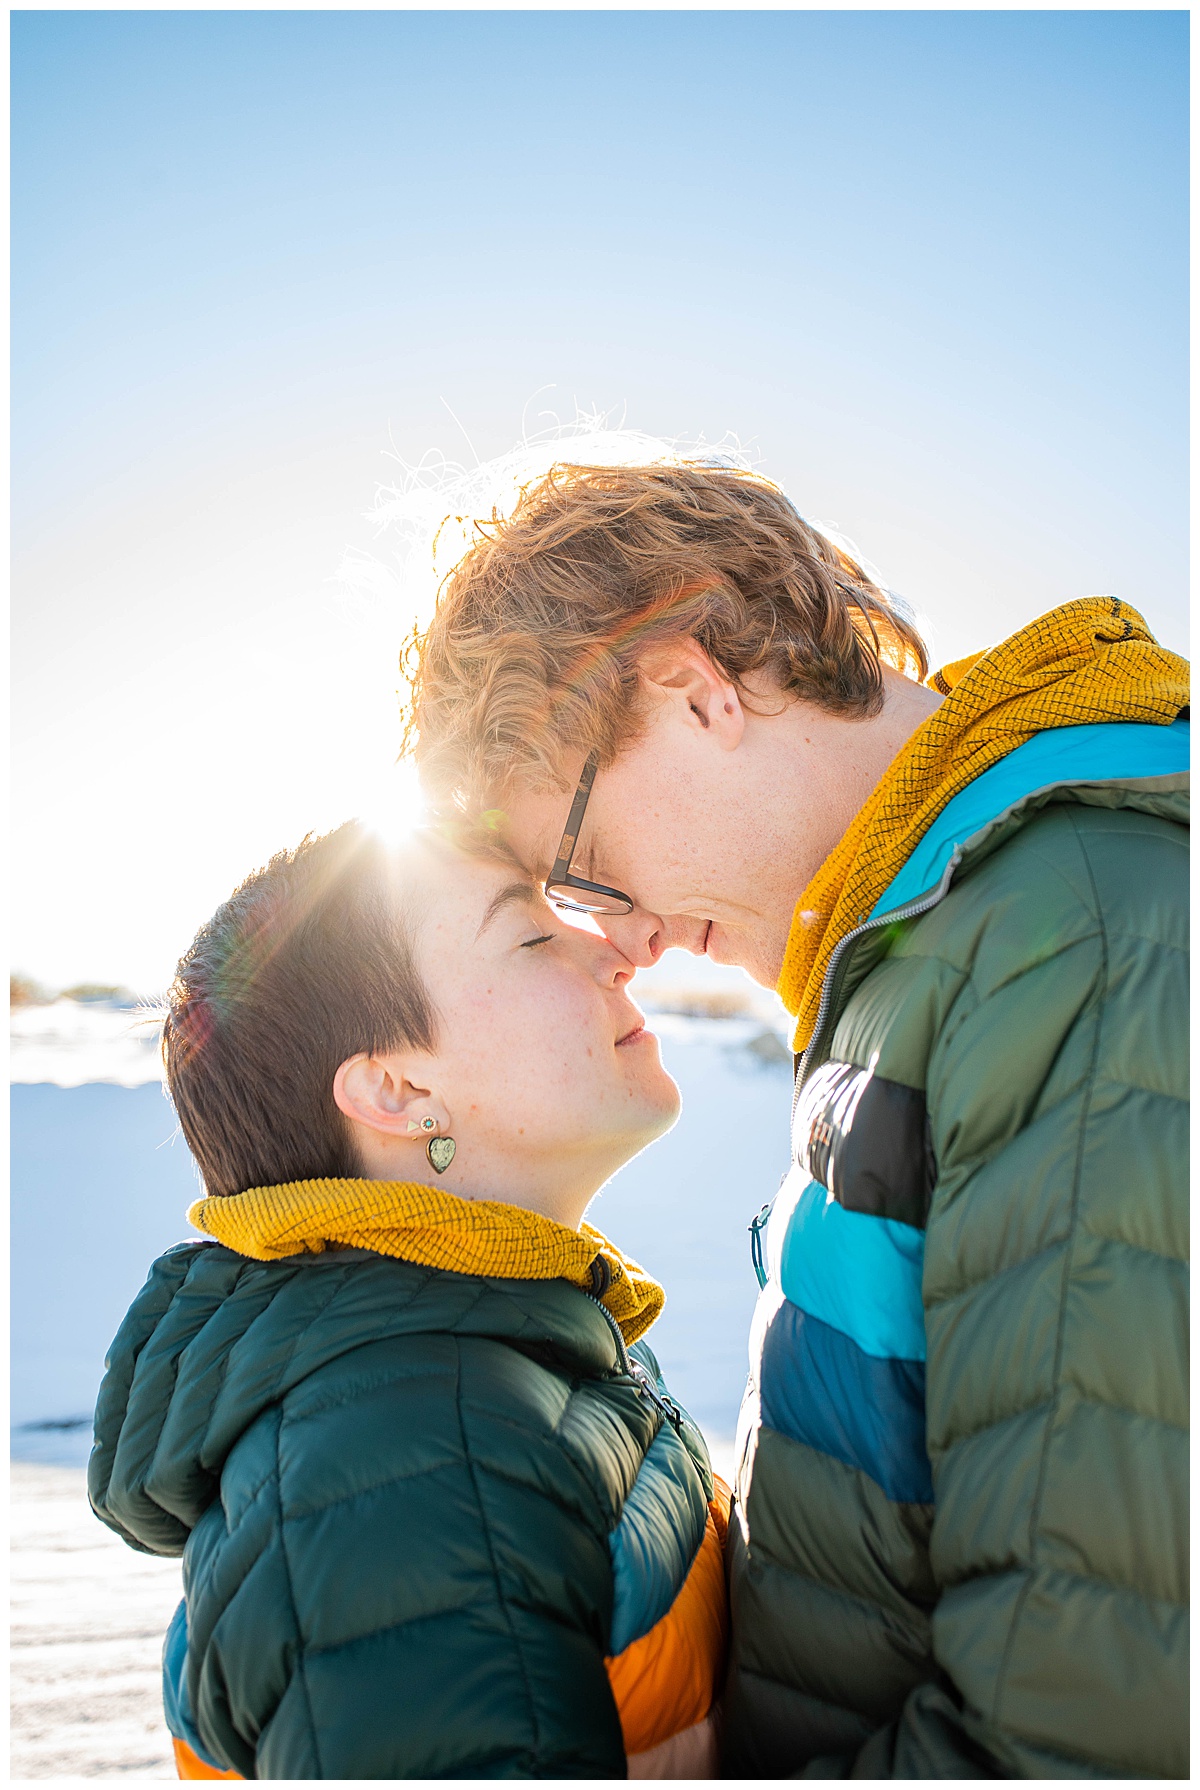 An up close photo of a couple with their foreheads pressed together, snow in the background.